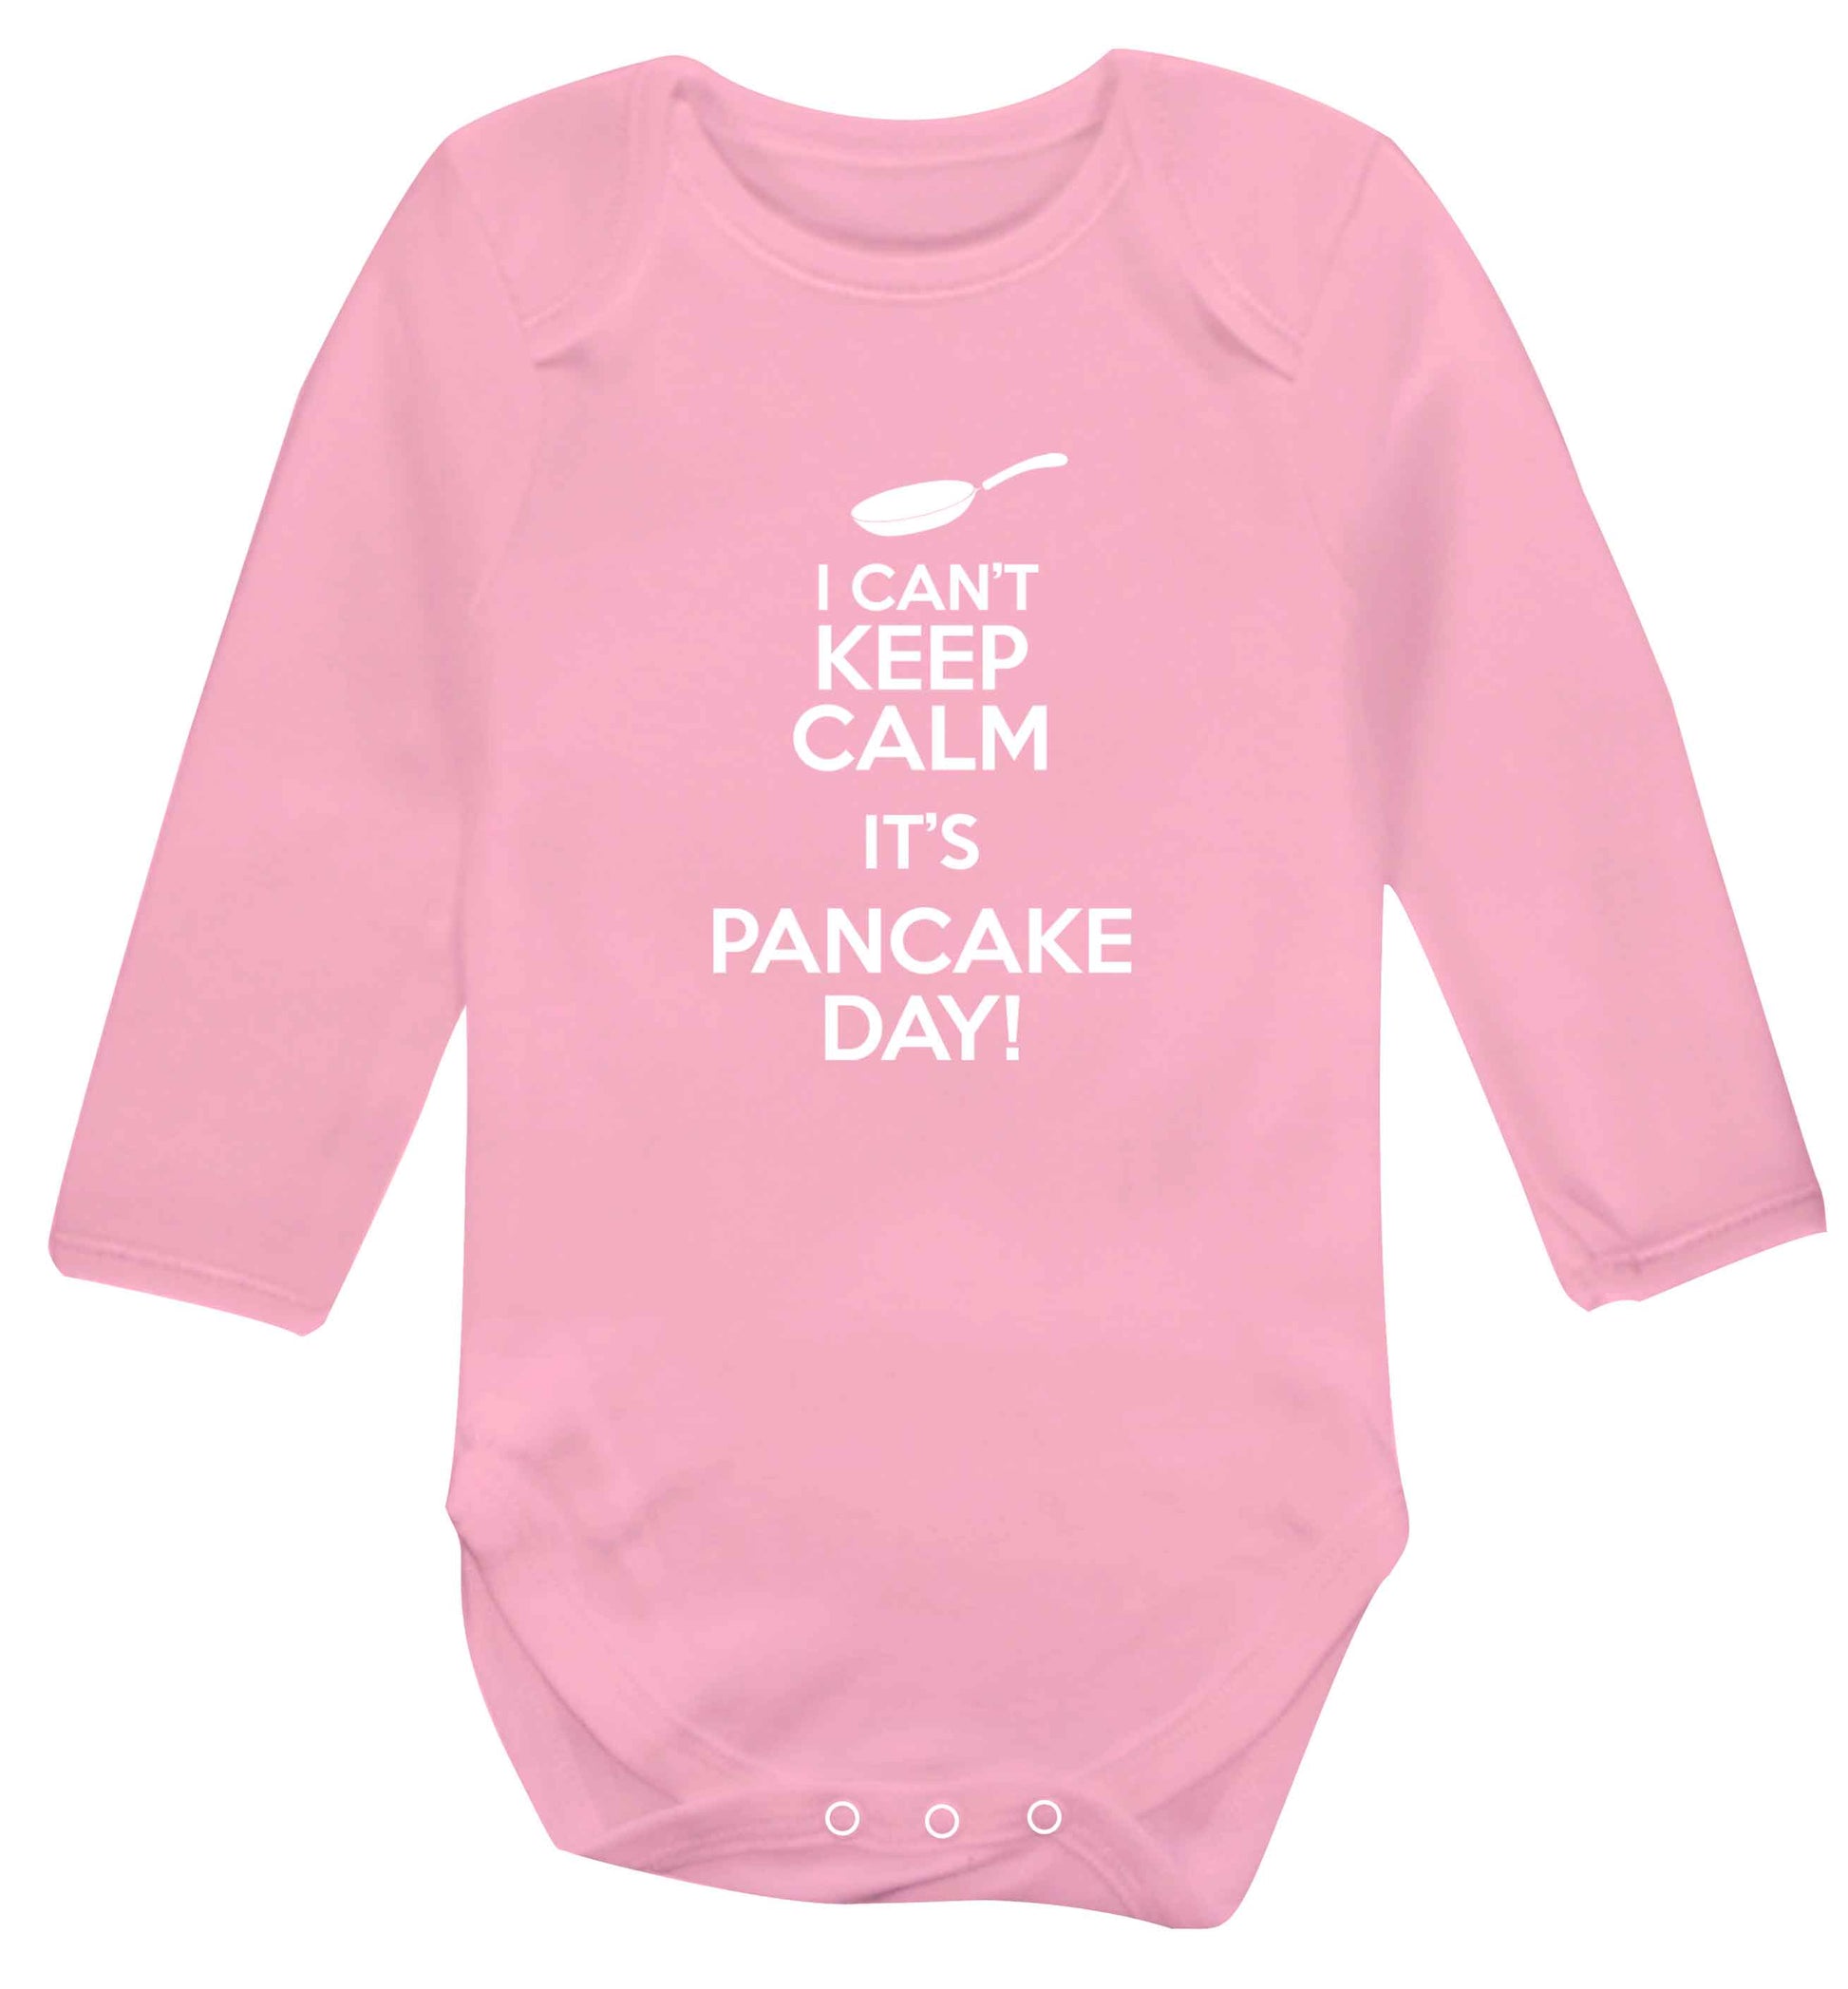 I can't keep calm it's pancake day! baby vest long sleeved pale pink 6-12 months